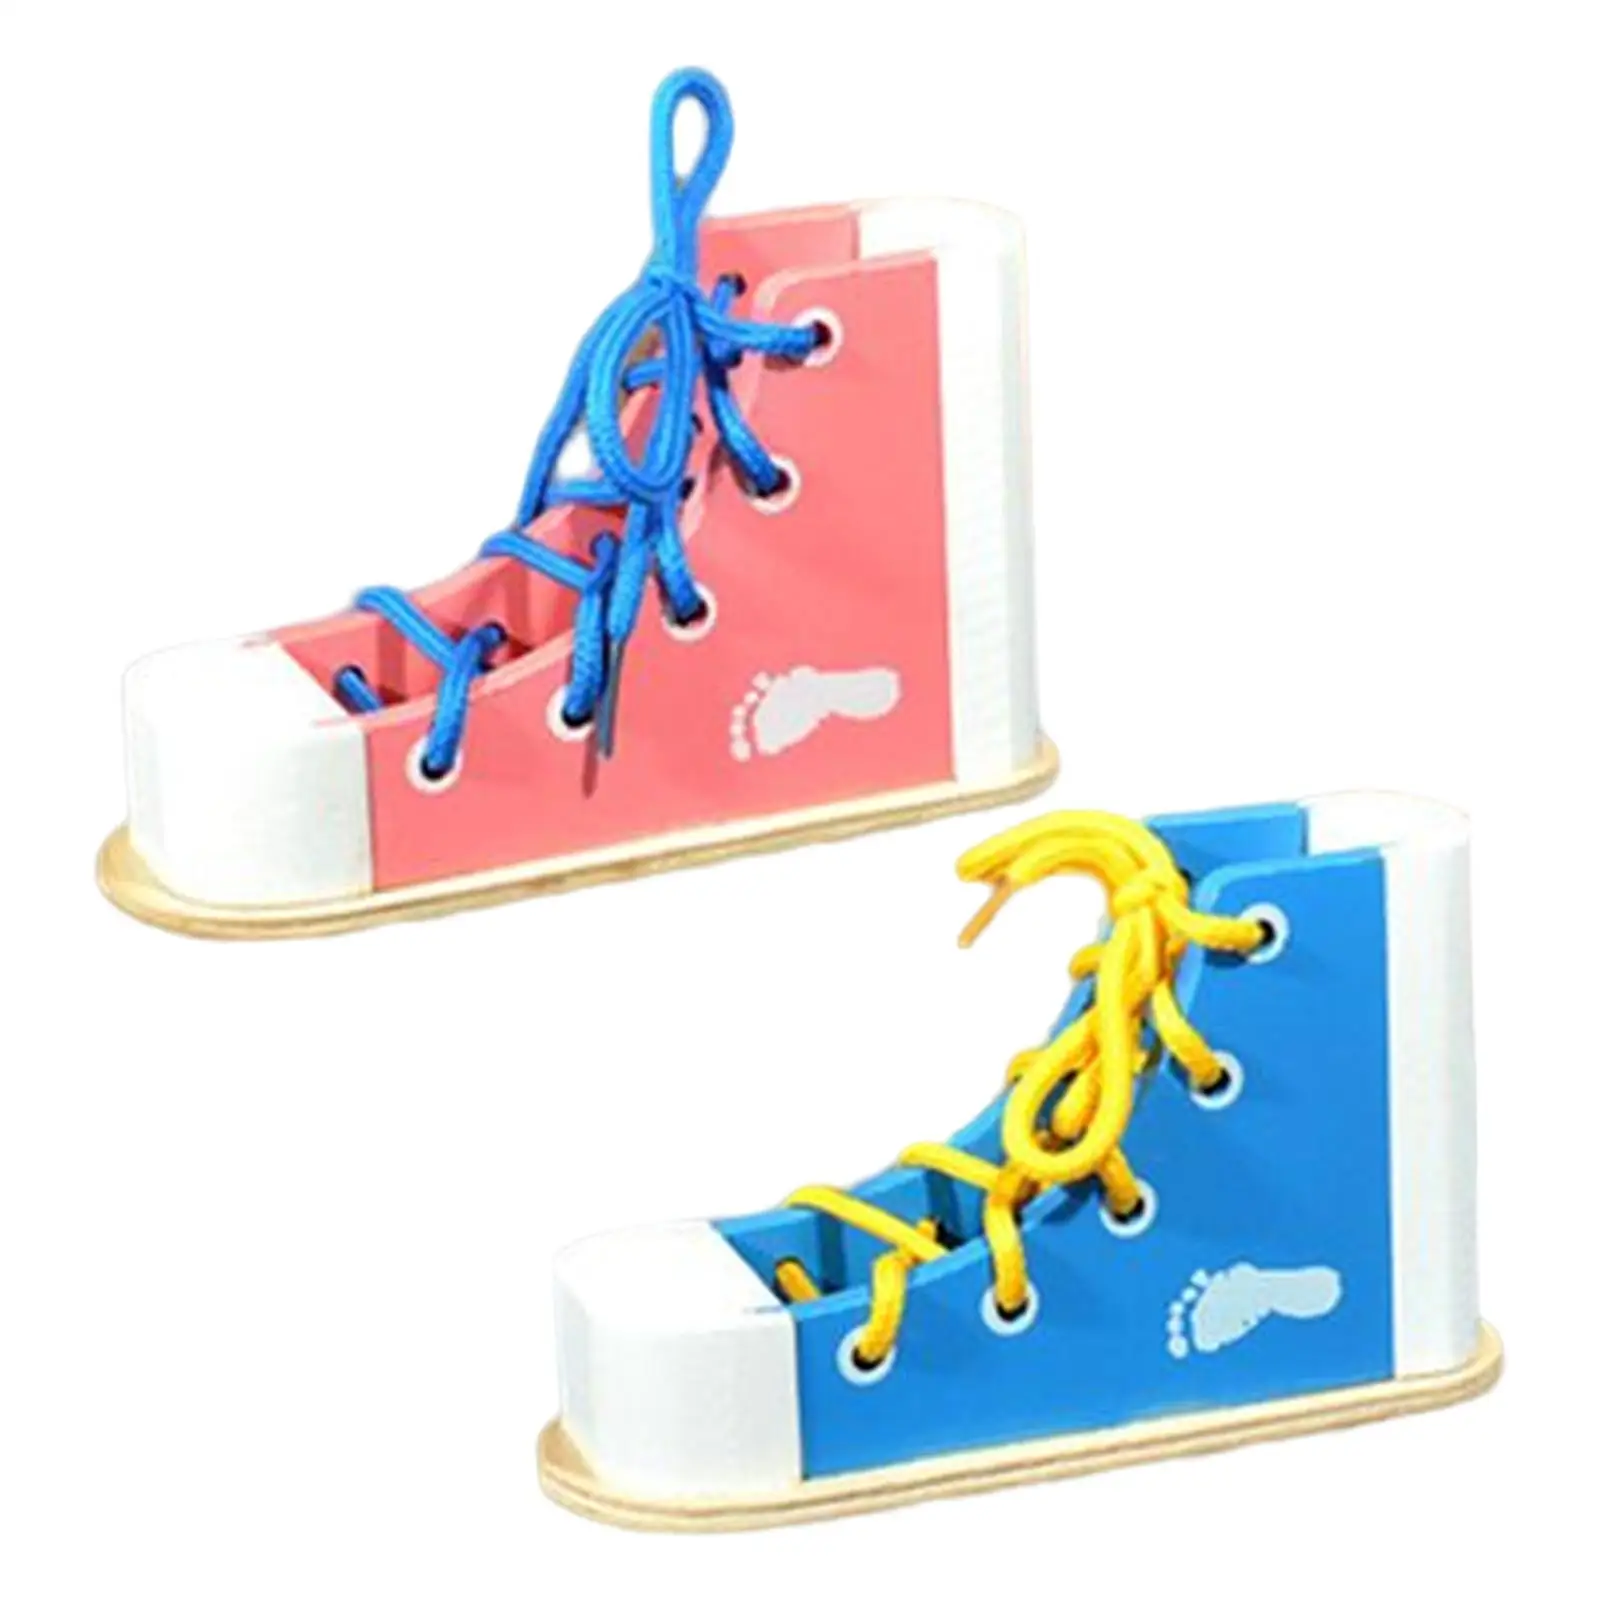 Learn to Tie Shoes Fine Motor Skills Toy Shoe Tying Aid Wooden Lacing Shoe Toy for Toddler